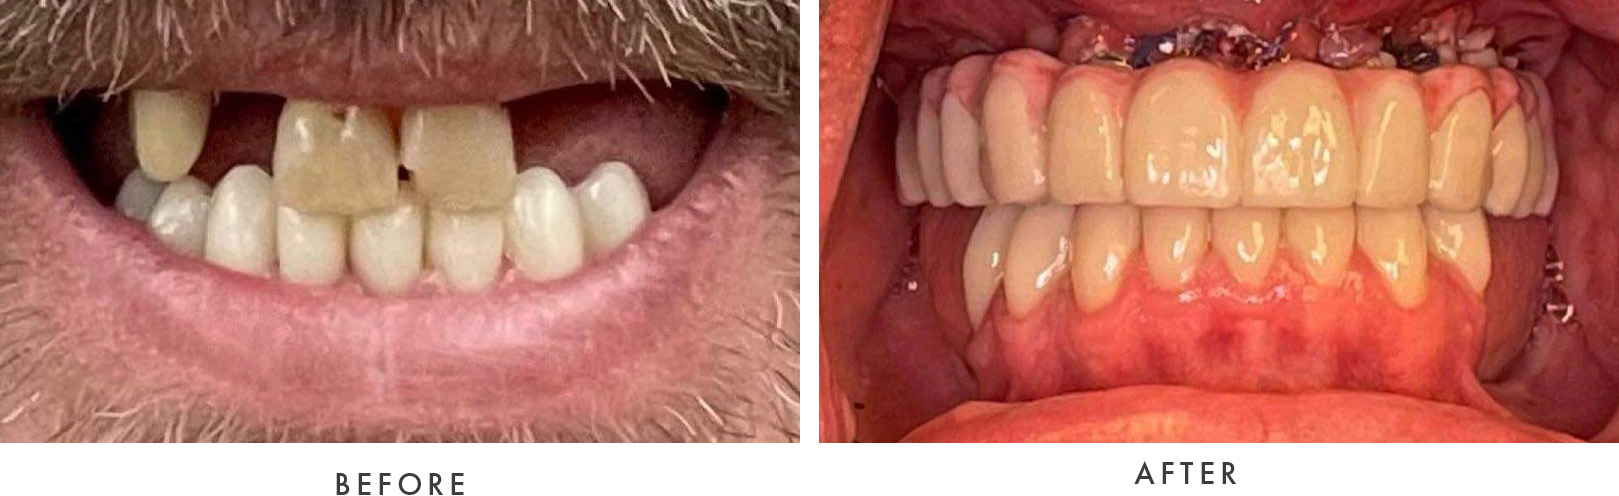 Wellington Family Dentistry & Implant Center before and after example model